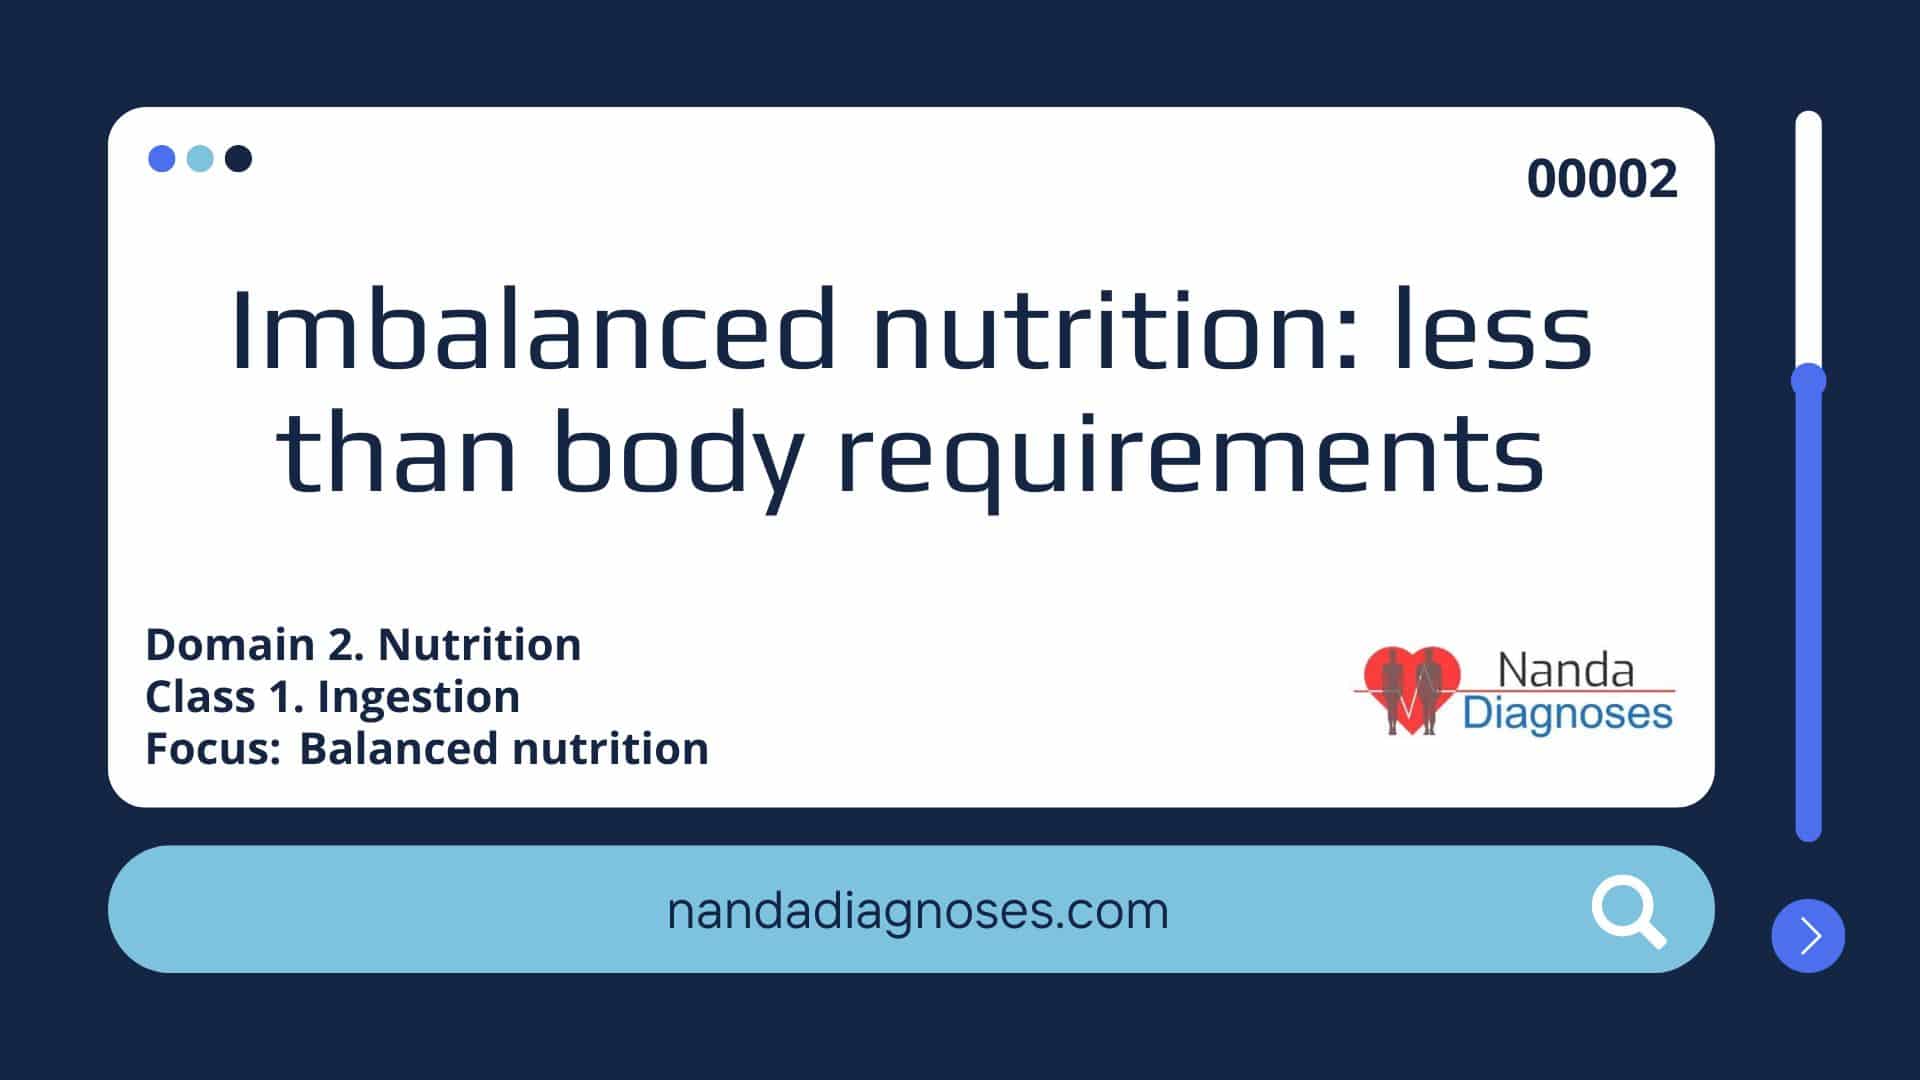 Imbalanced nutrition: less than body requirements